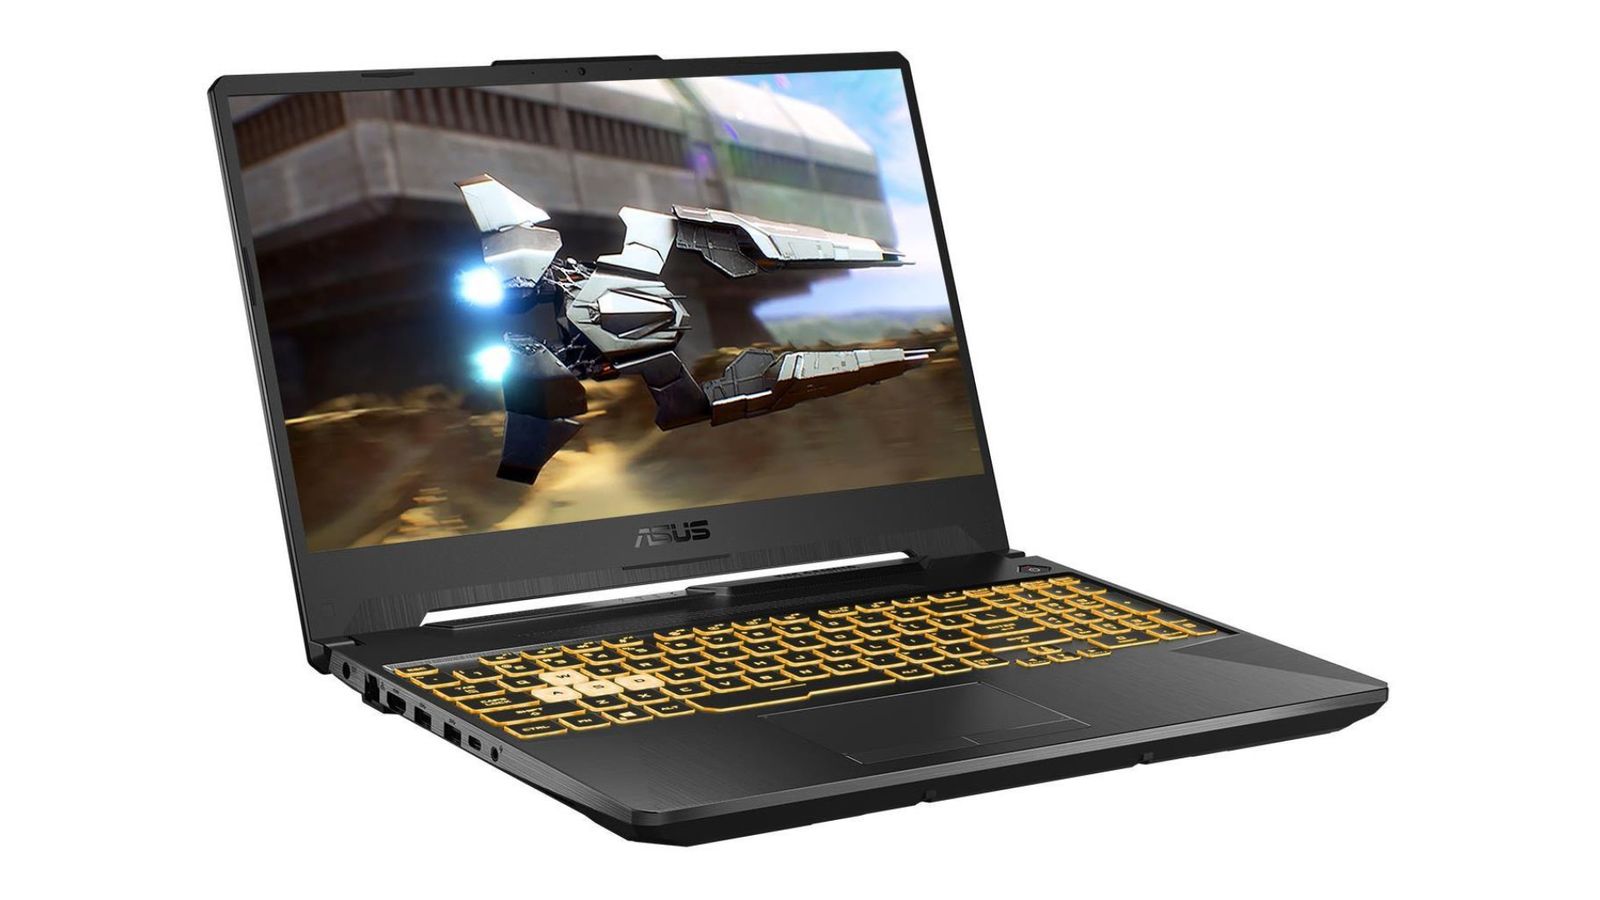 Best Starfield gaming laptop - ASUS TUF Gaming F15 product image of a black gaming laptop featuring yellow backlit keys and a small space ship on the display.